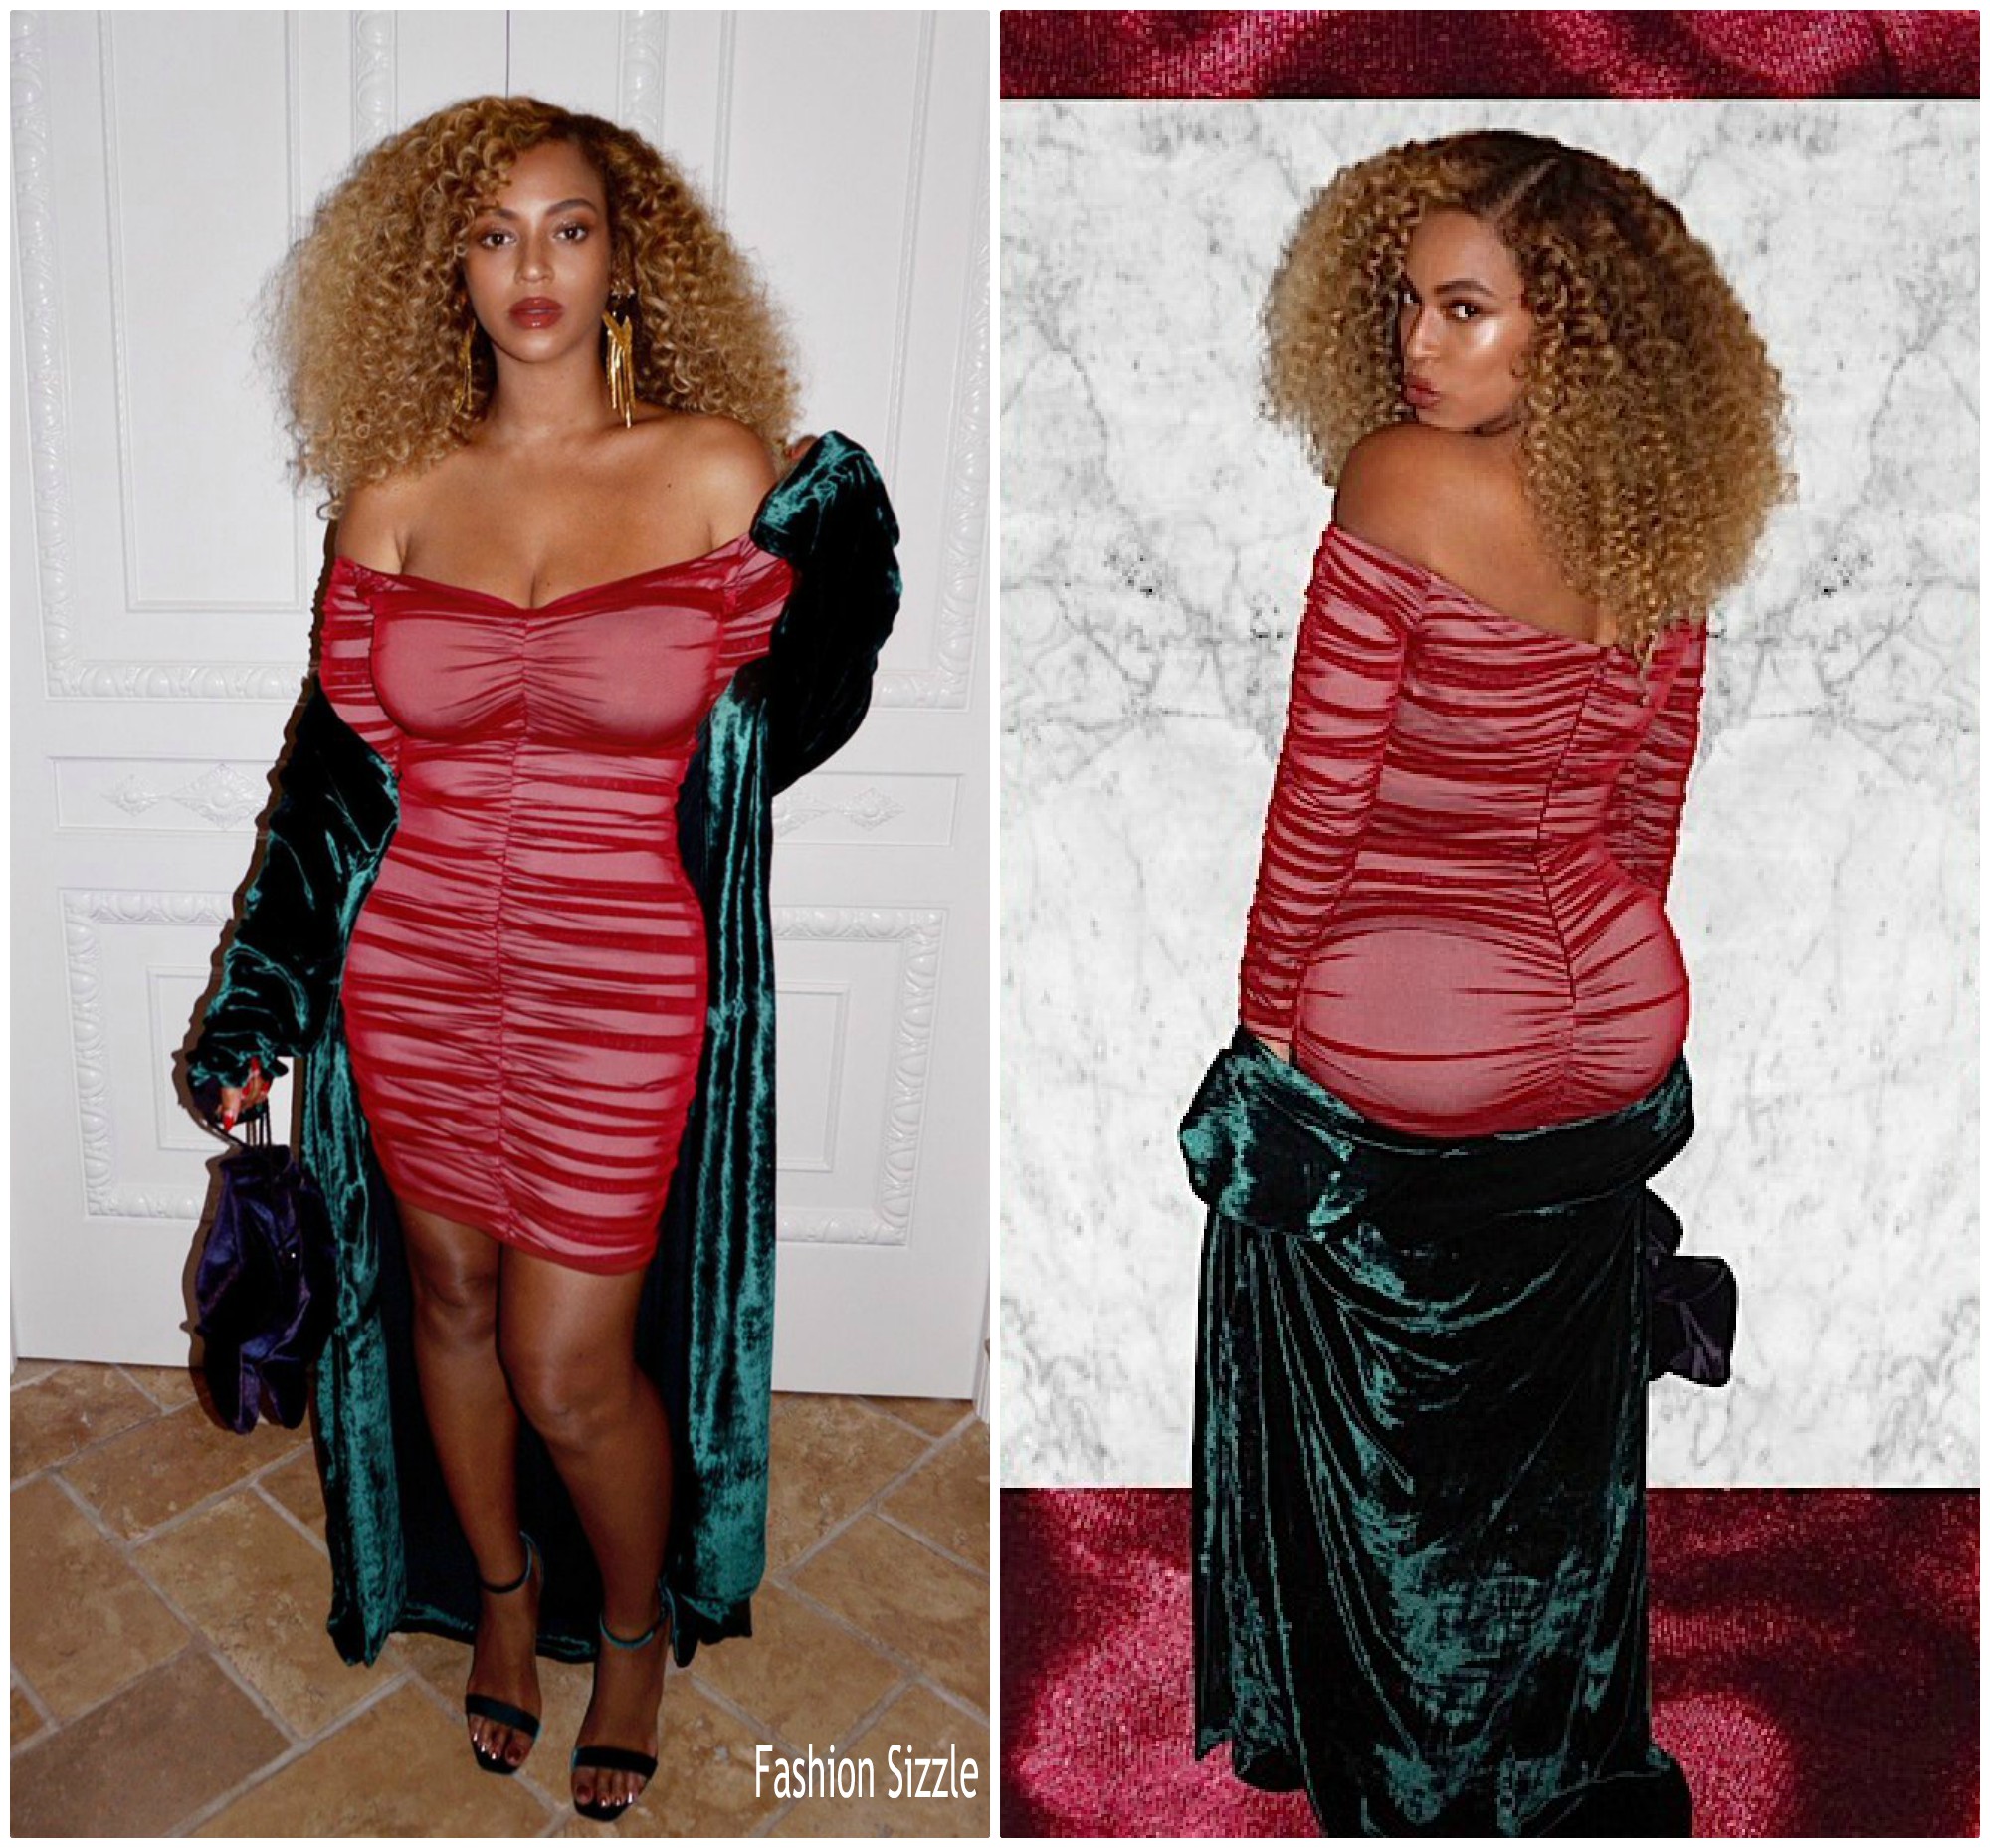 beyonce-in-house-of-cb-wine-grind-charity-event